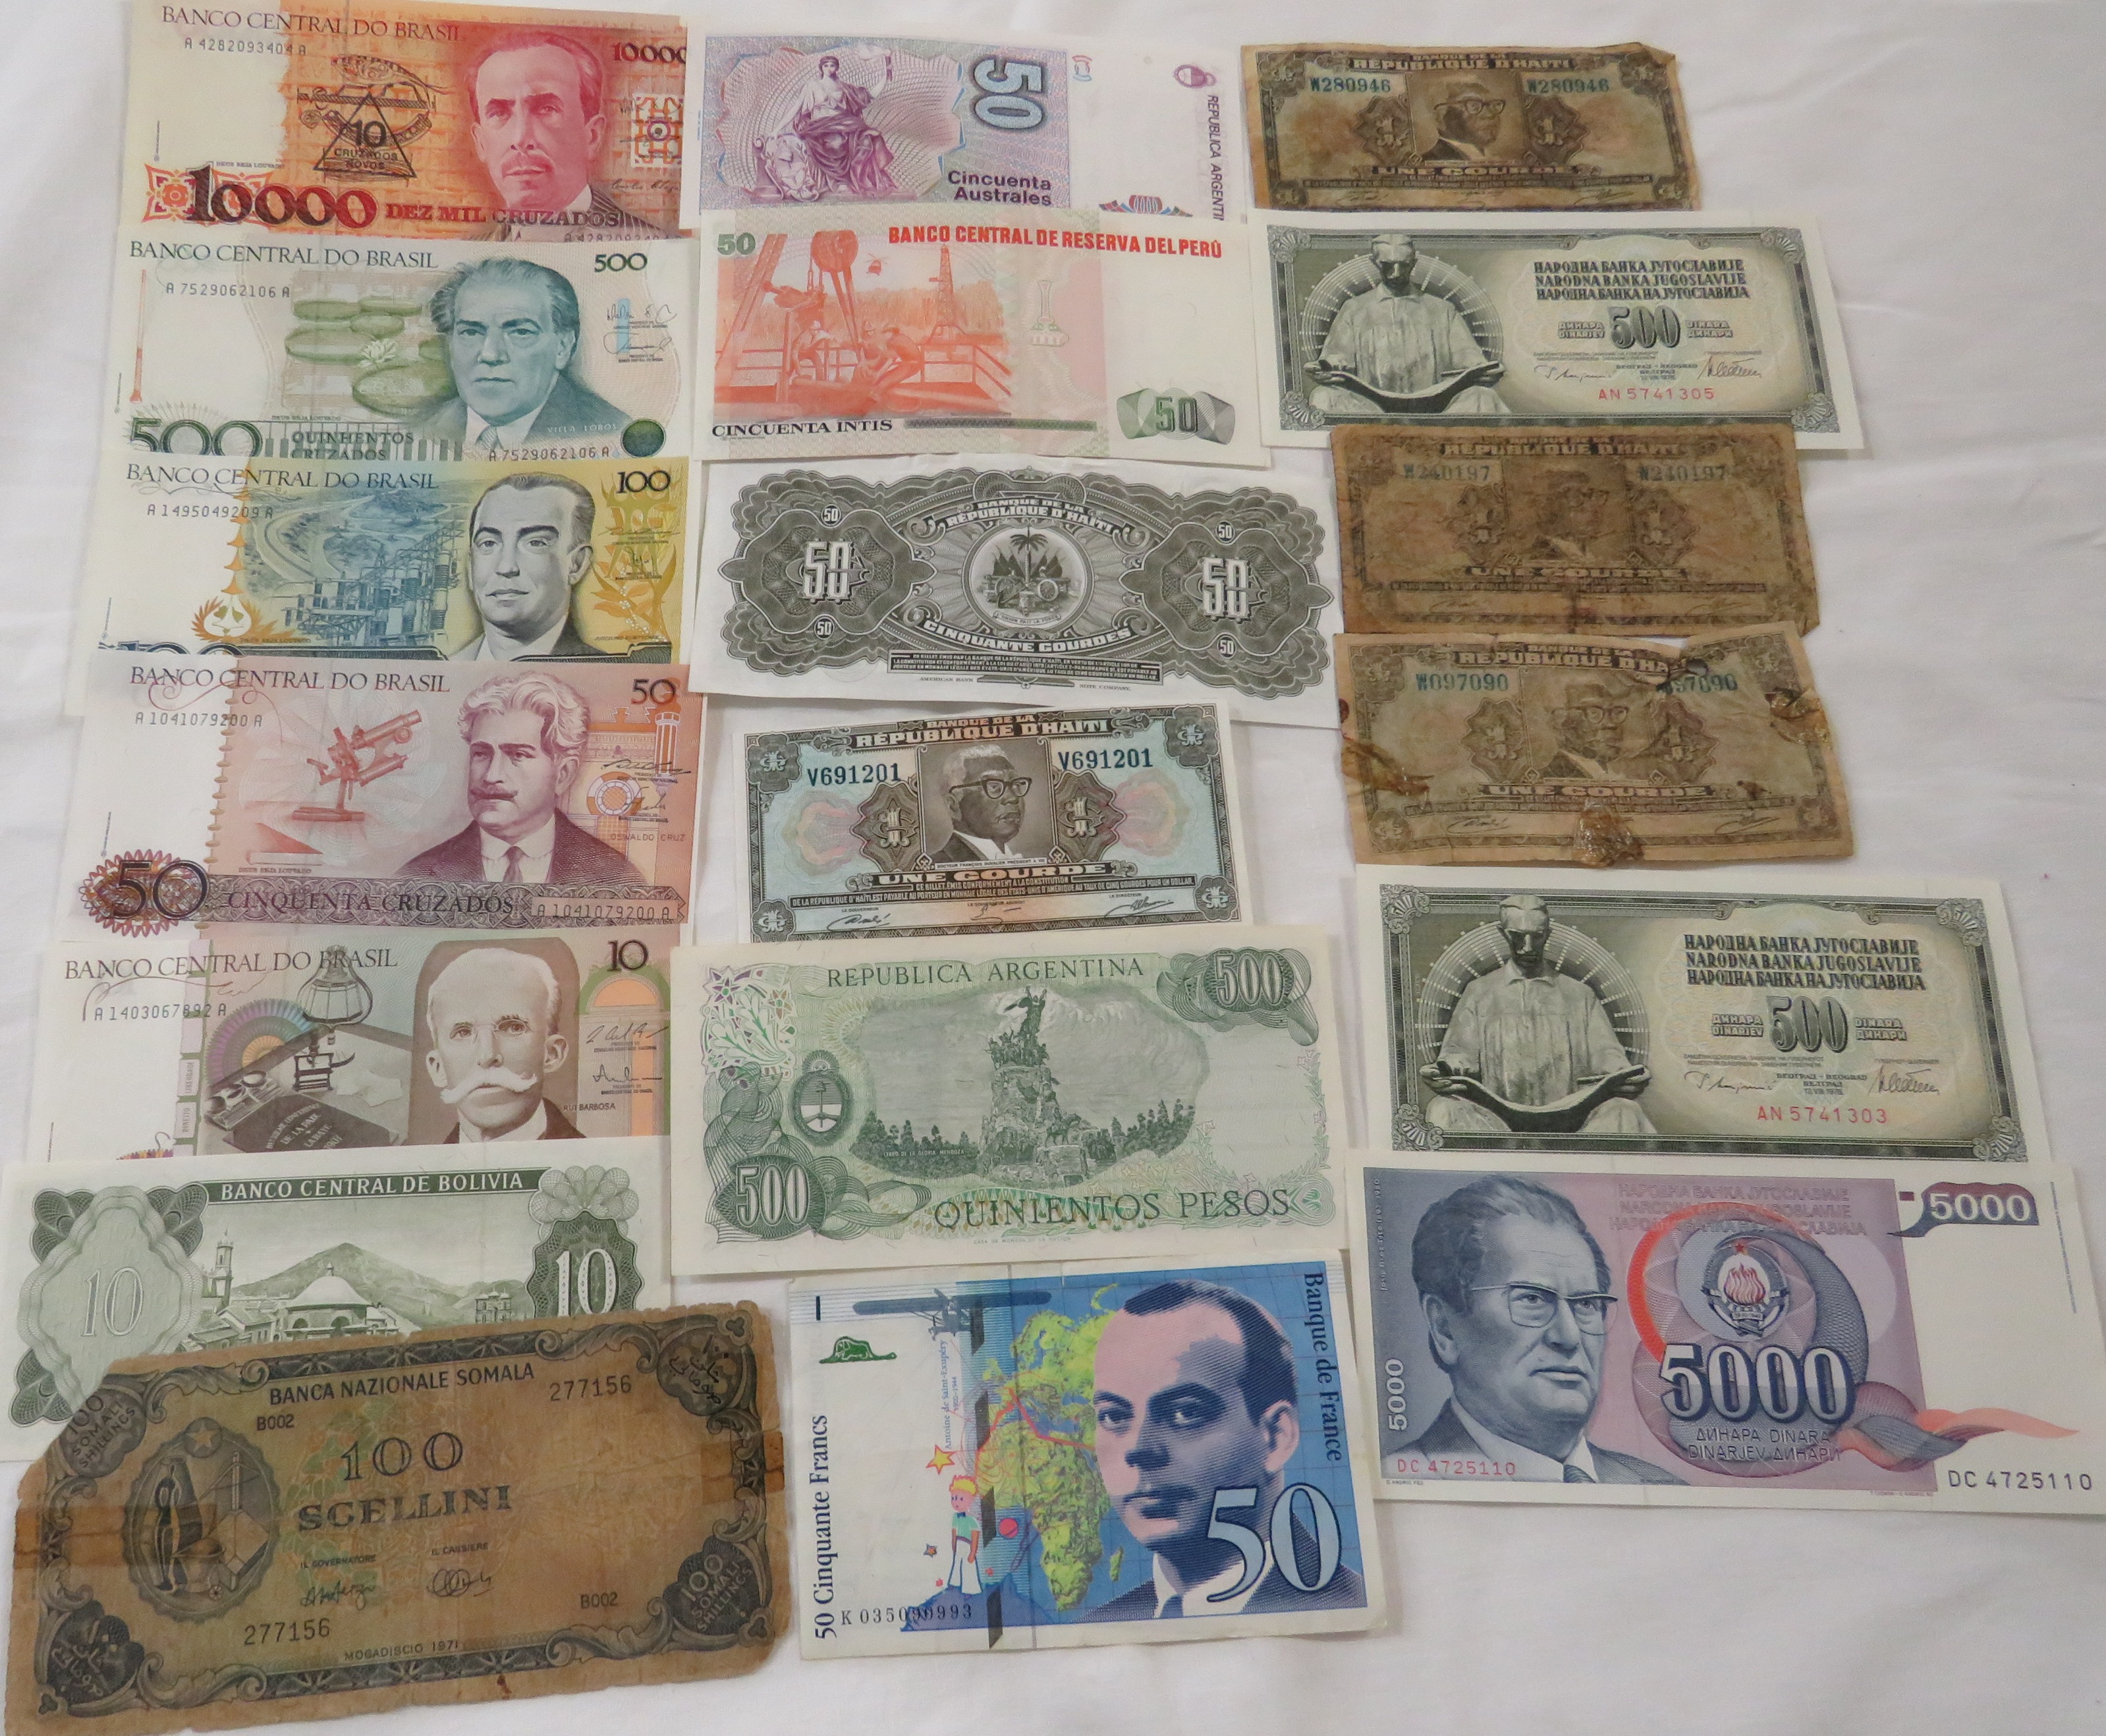 Five unused bank notes of Brazil (1000, 500, 100, 50 and 10 cruzados), unused Central Bank of